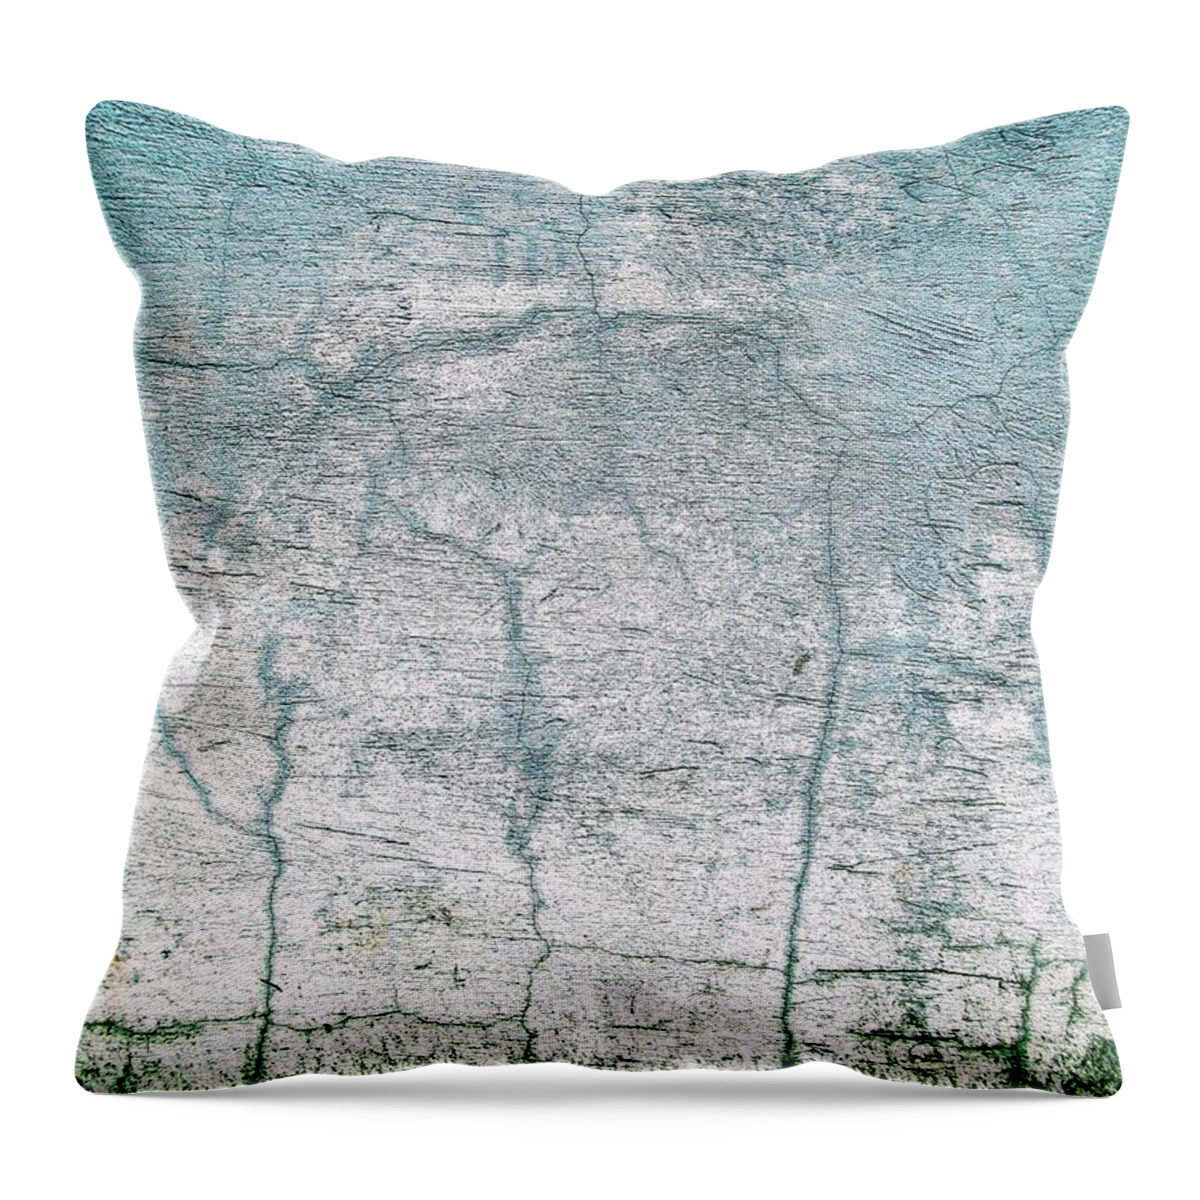 Texture Throw Pillow featuring the digital art Wall Abstract 11 by Maria Huntley